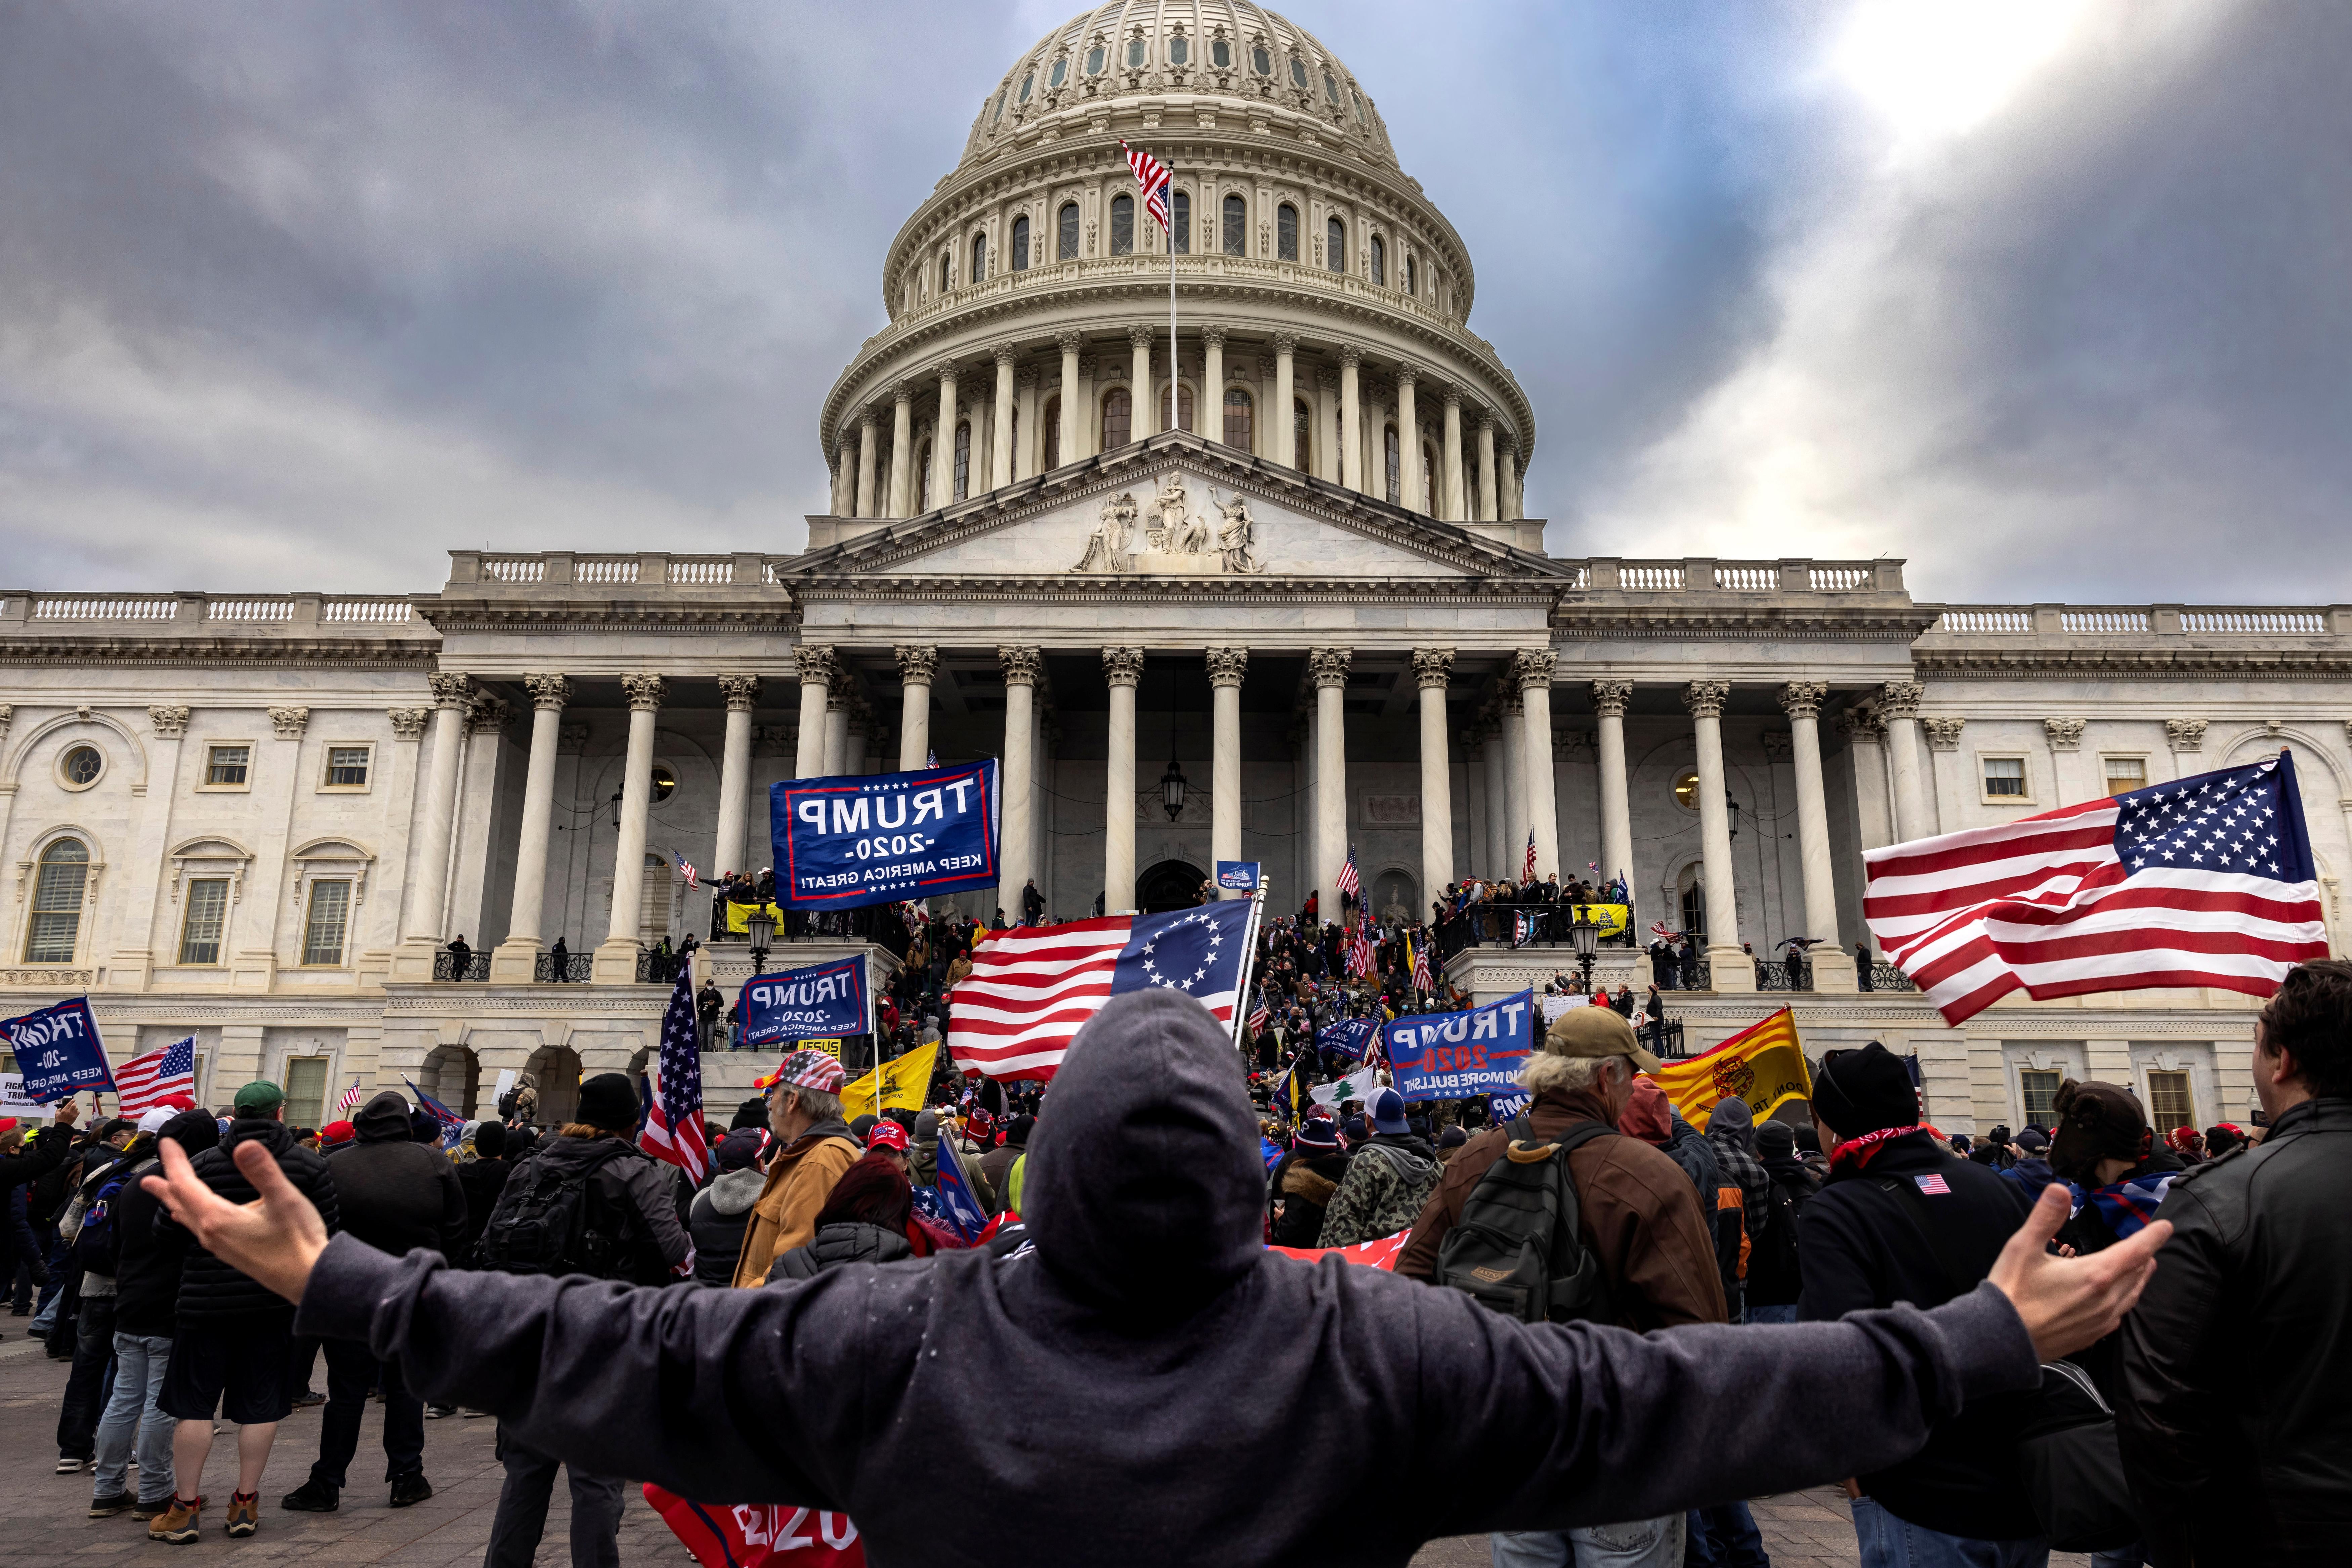 A man in a hoodie stands extending both arms straight out to his sides in front of a crowd of flag-bearing Trump supporters storming the Capitol.